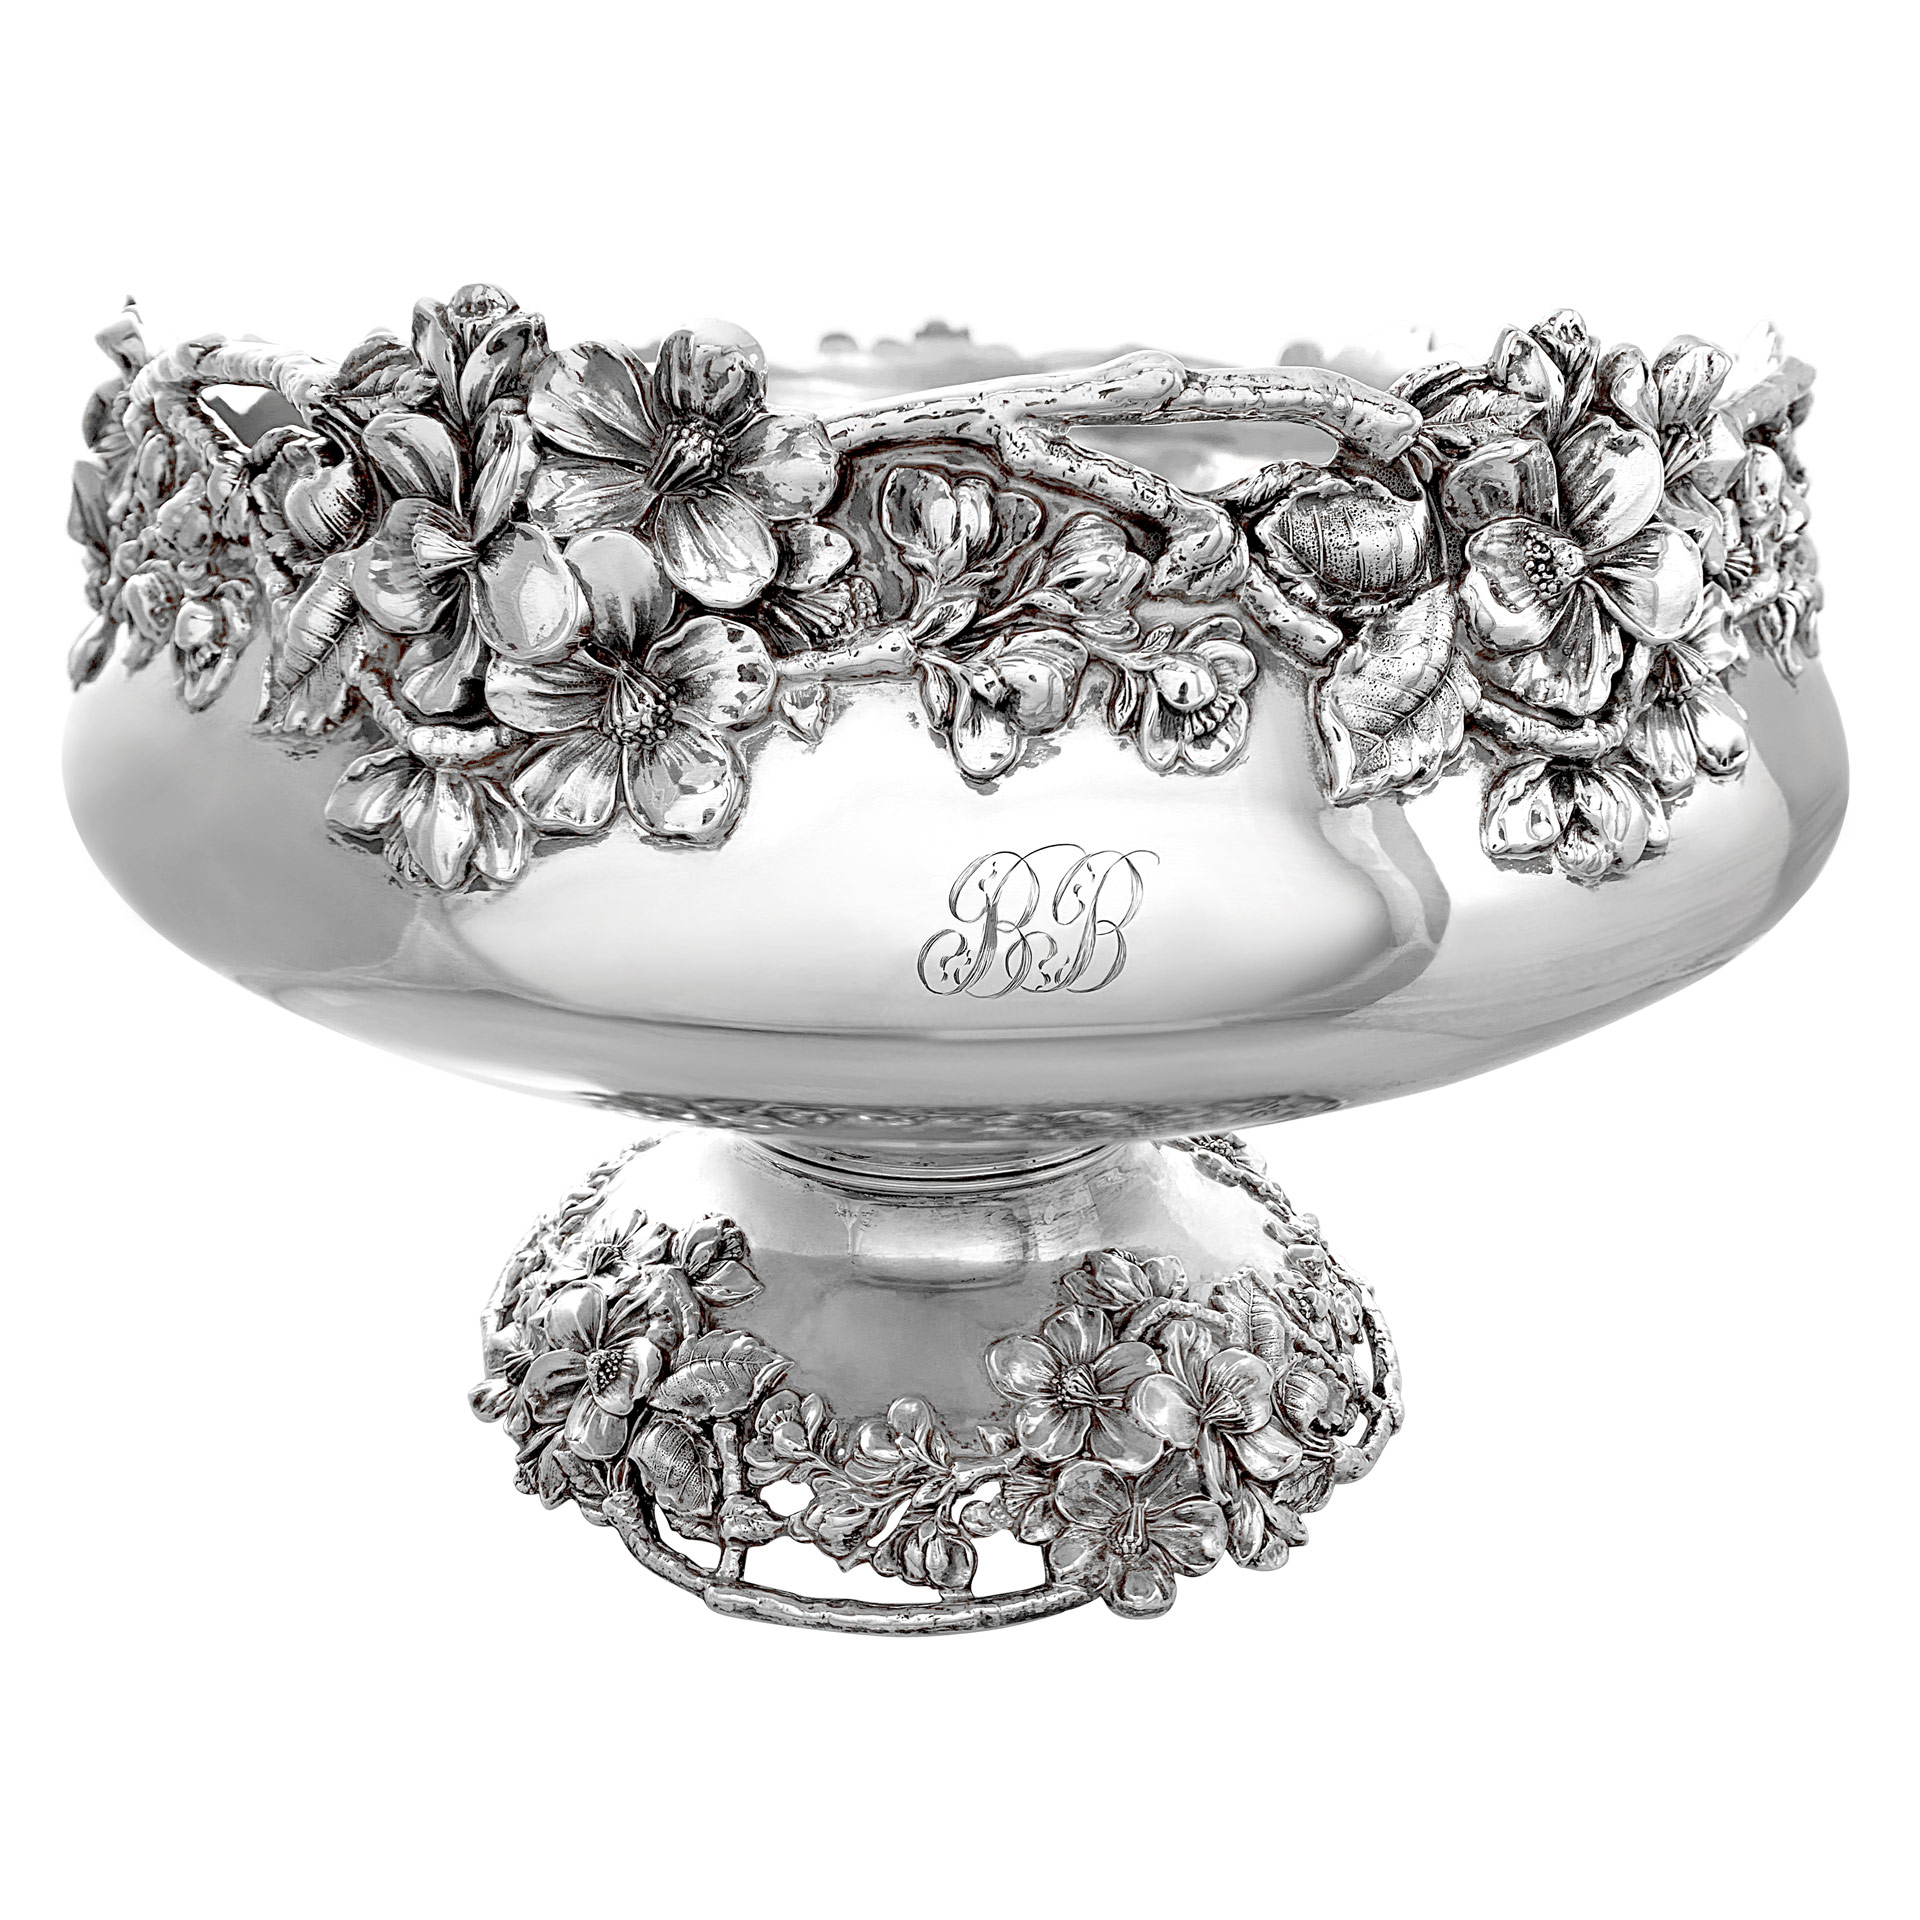 Antique gilded age sterling silver centerpiece bowl. Made by Ferdinand Fuchs in New York, circa 1895. image 1